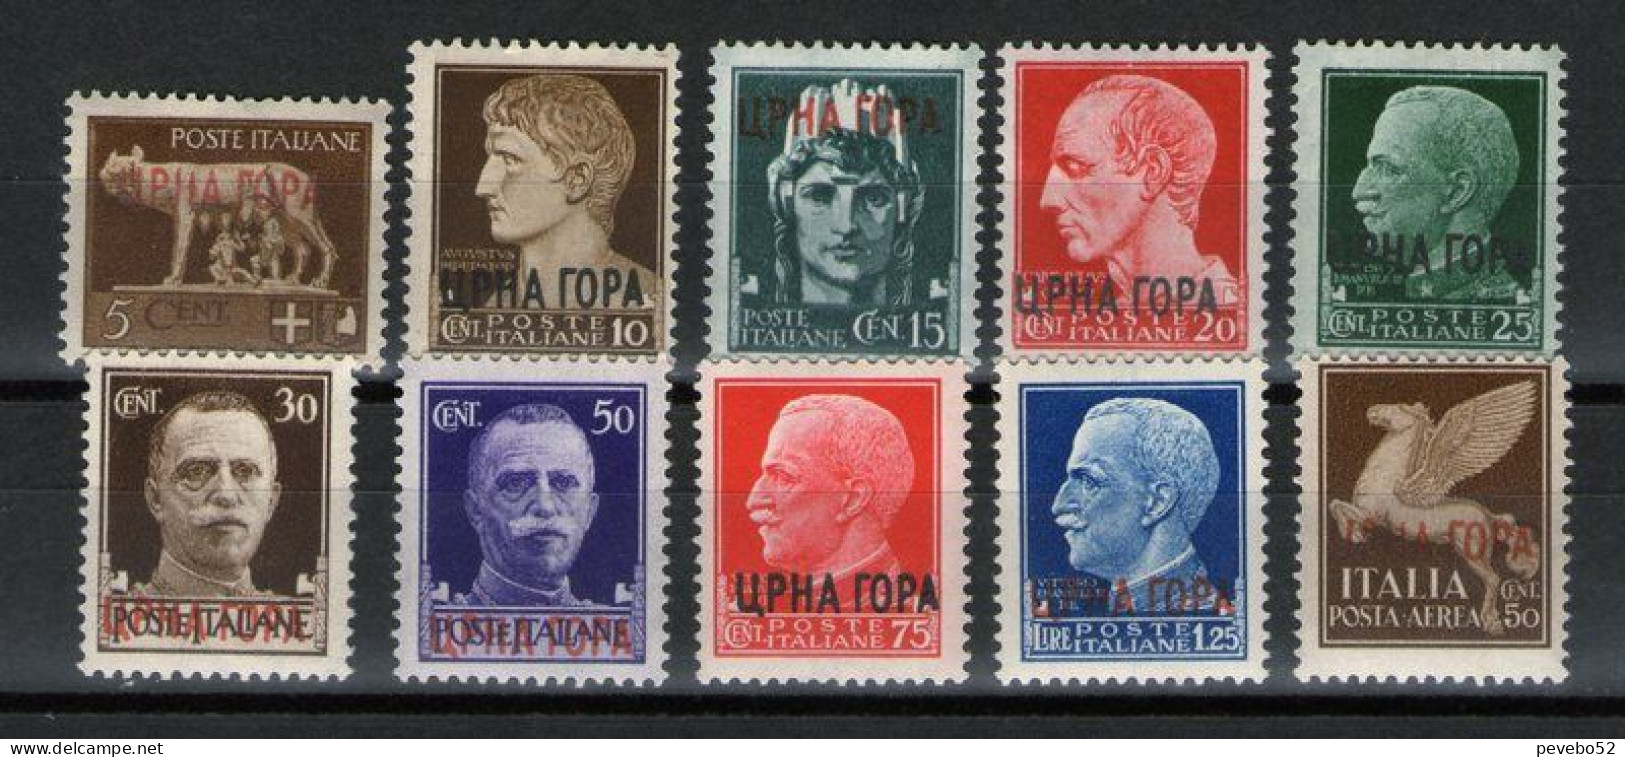 MONTENEGRO 1941 - Italy Postage Stamps Of 1929 Overprinted ЦРНА ГОРА MNH - Montenegro